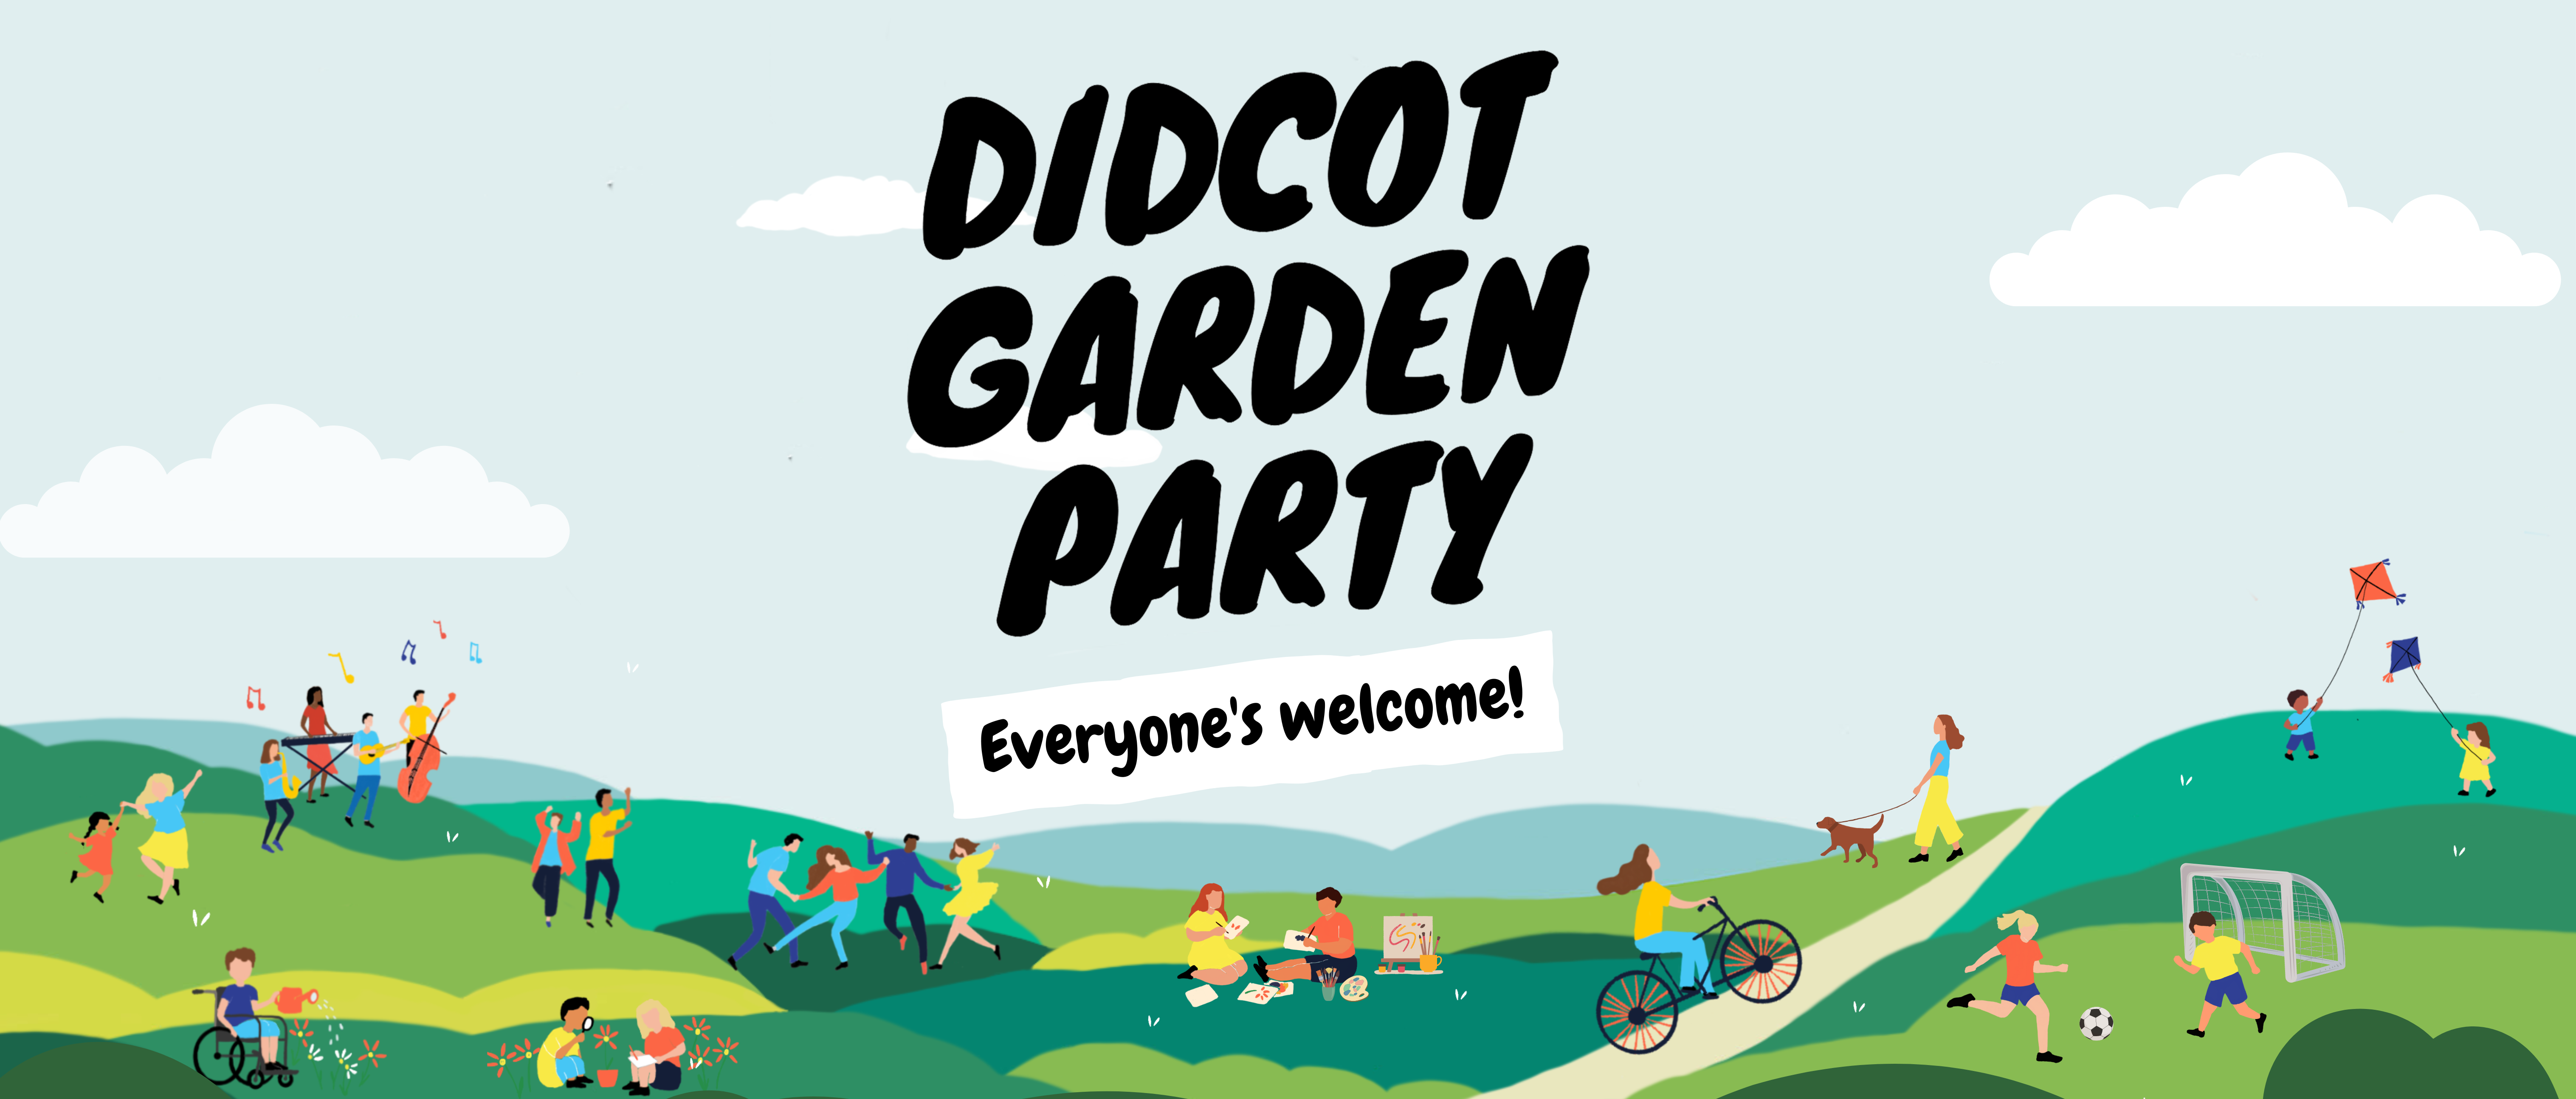 Host of free activities this summer as part of Didcot Garden Party